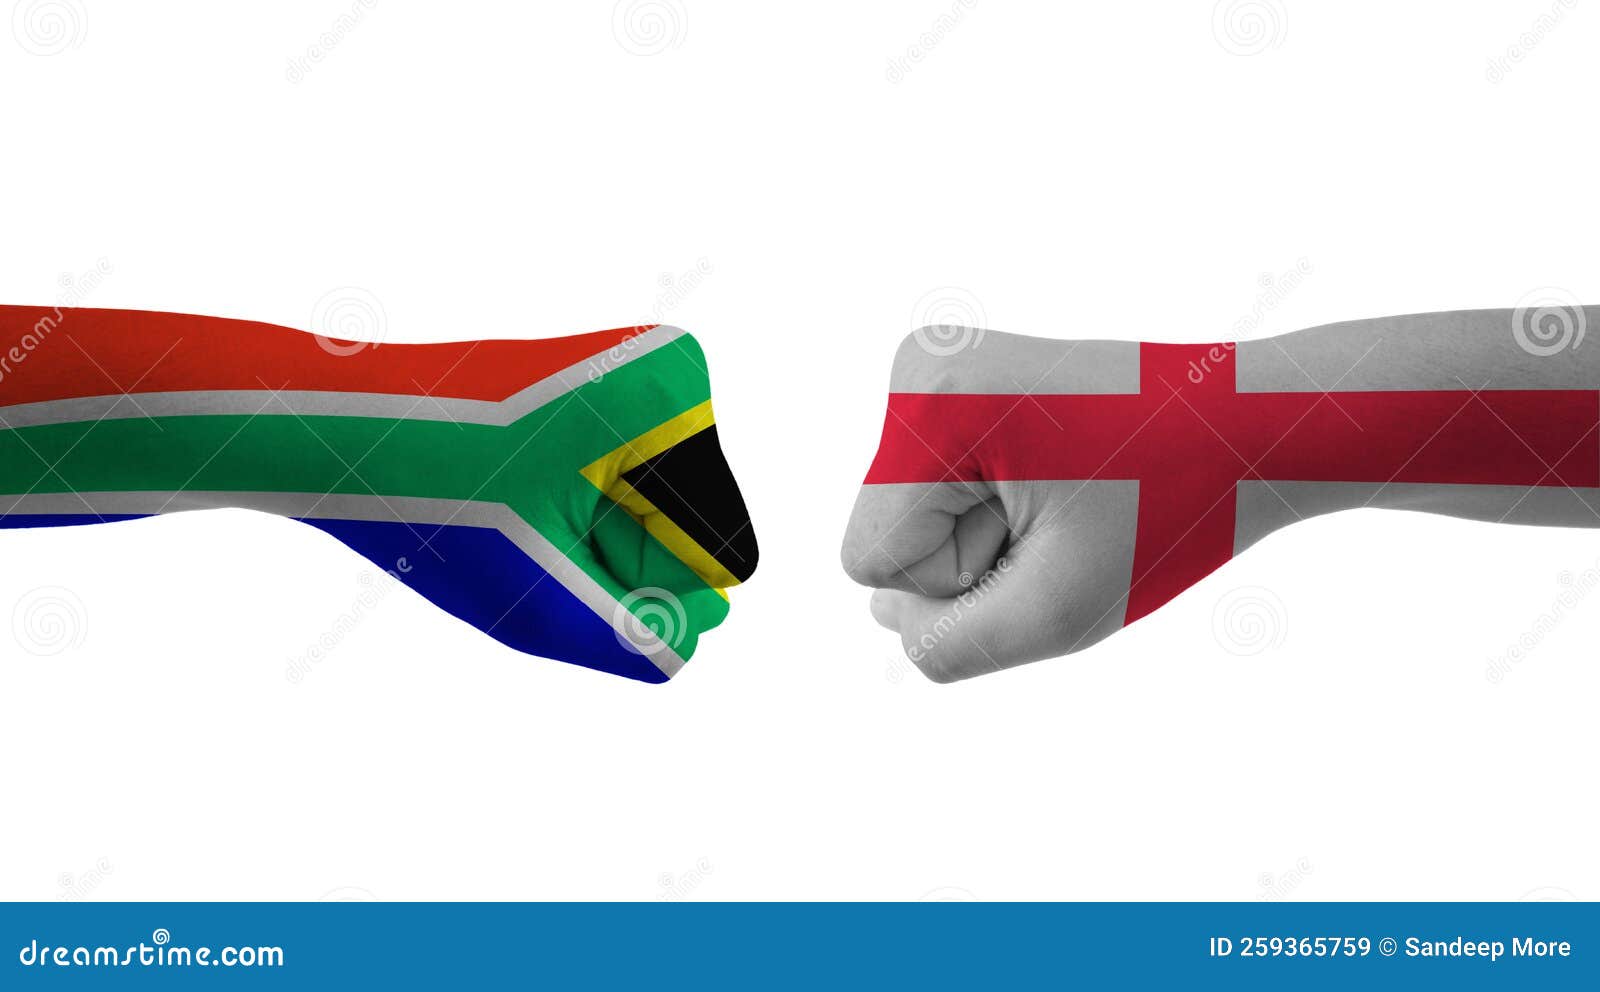 South Africa Vs England Hand Flag Cricket Match Stock Image